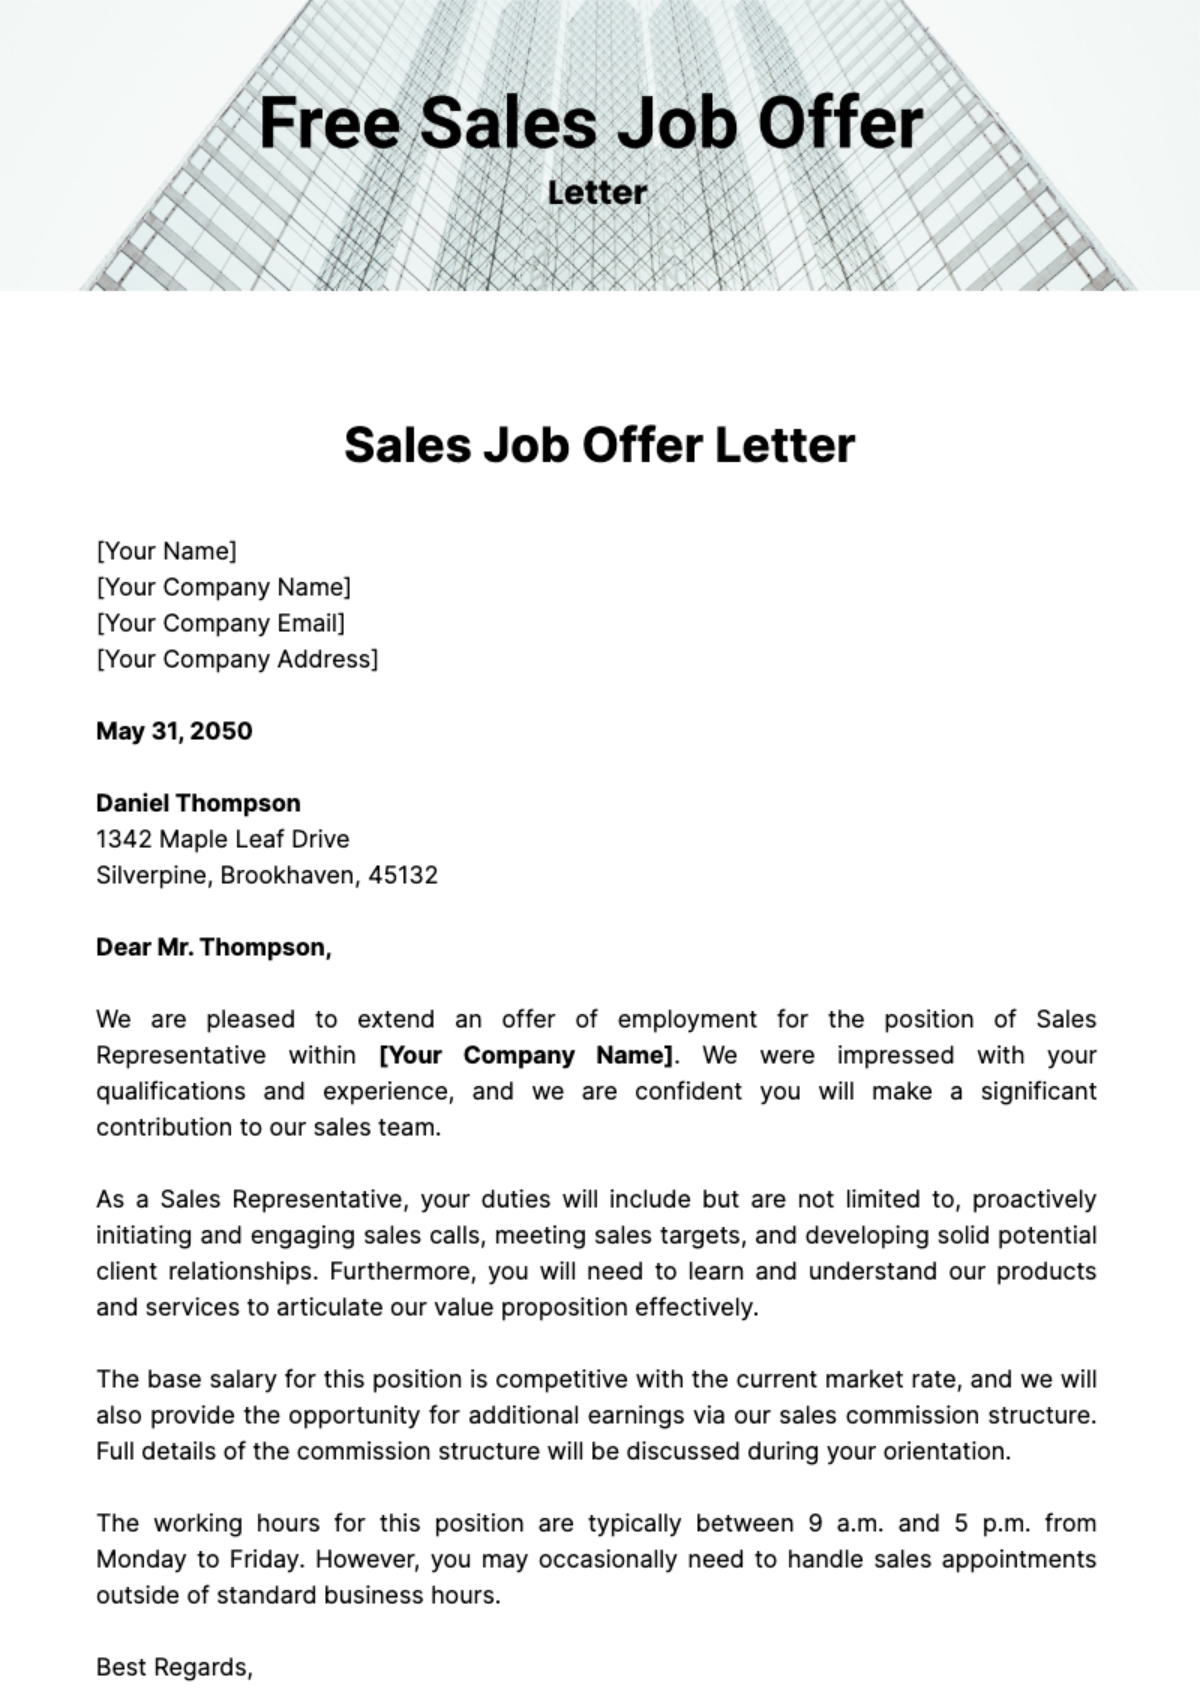 Free Sales Job Offer Letter Template